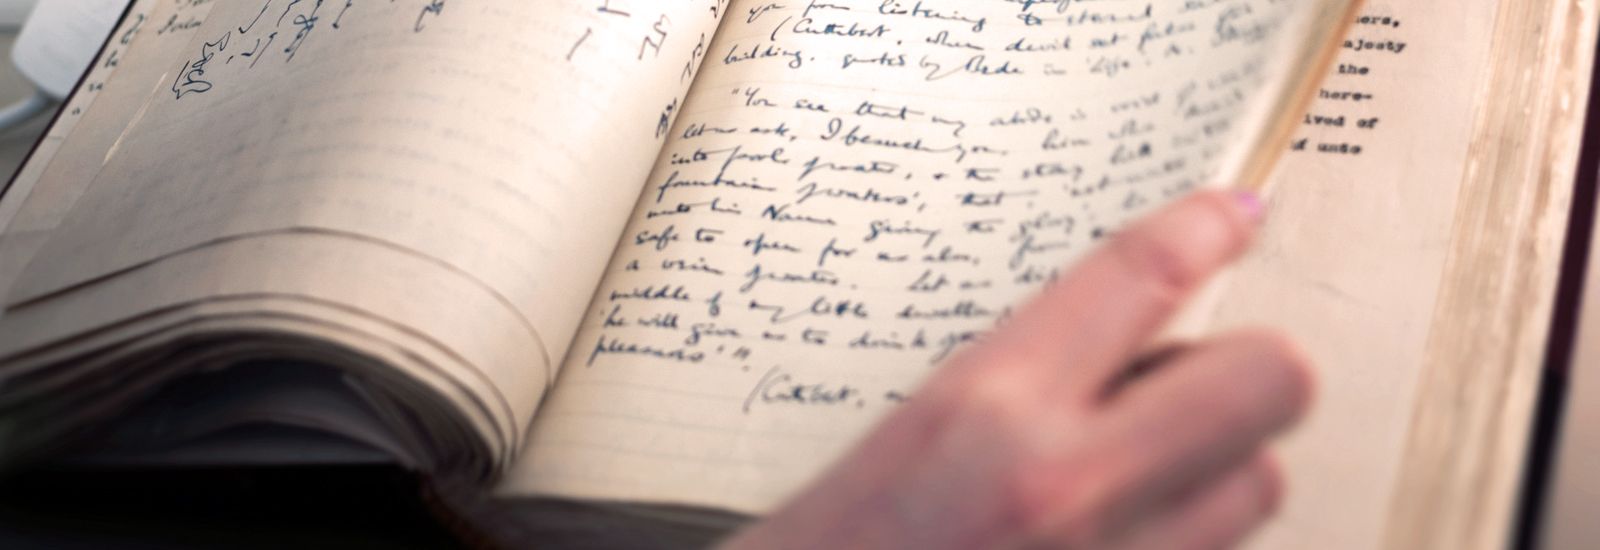 A close up of a book with handwritten text inside